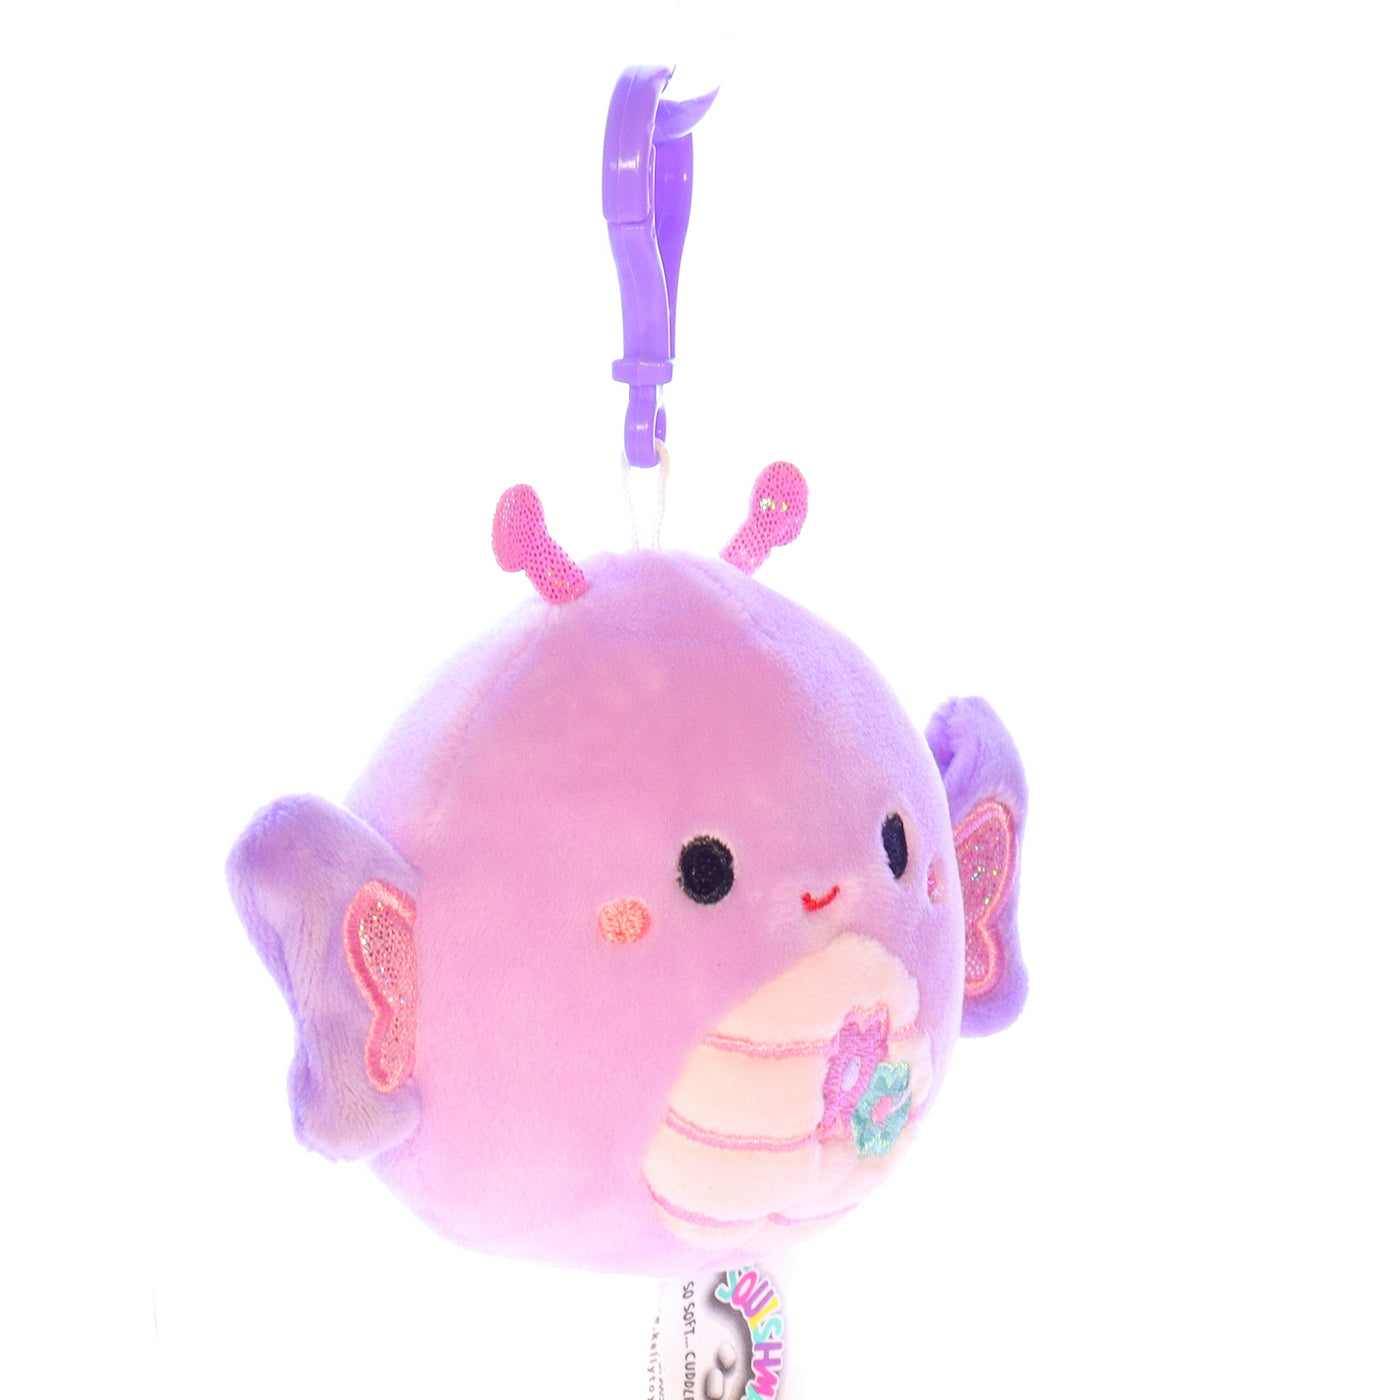 Squishmallows_734689975198_Brenda_the_Butterfly_Keychain_Stuffed_Animal_2019 Front Right View